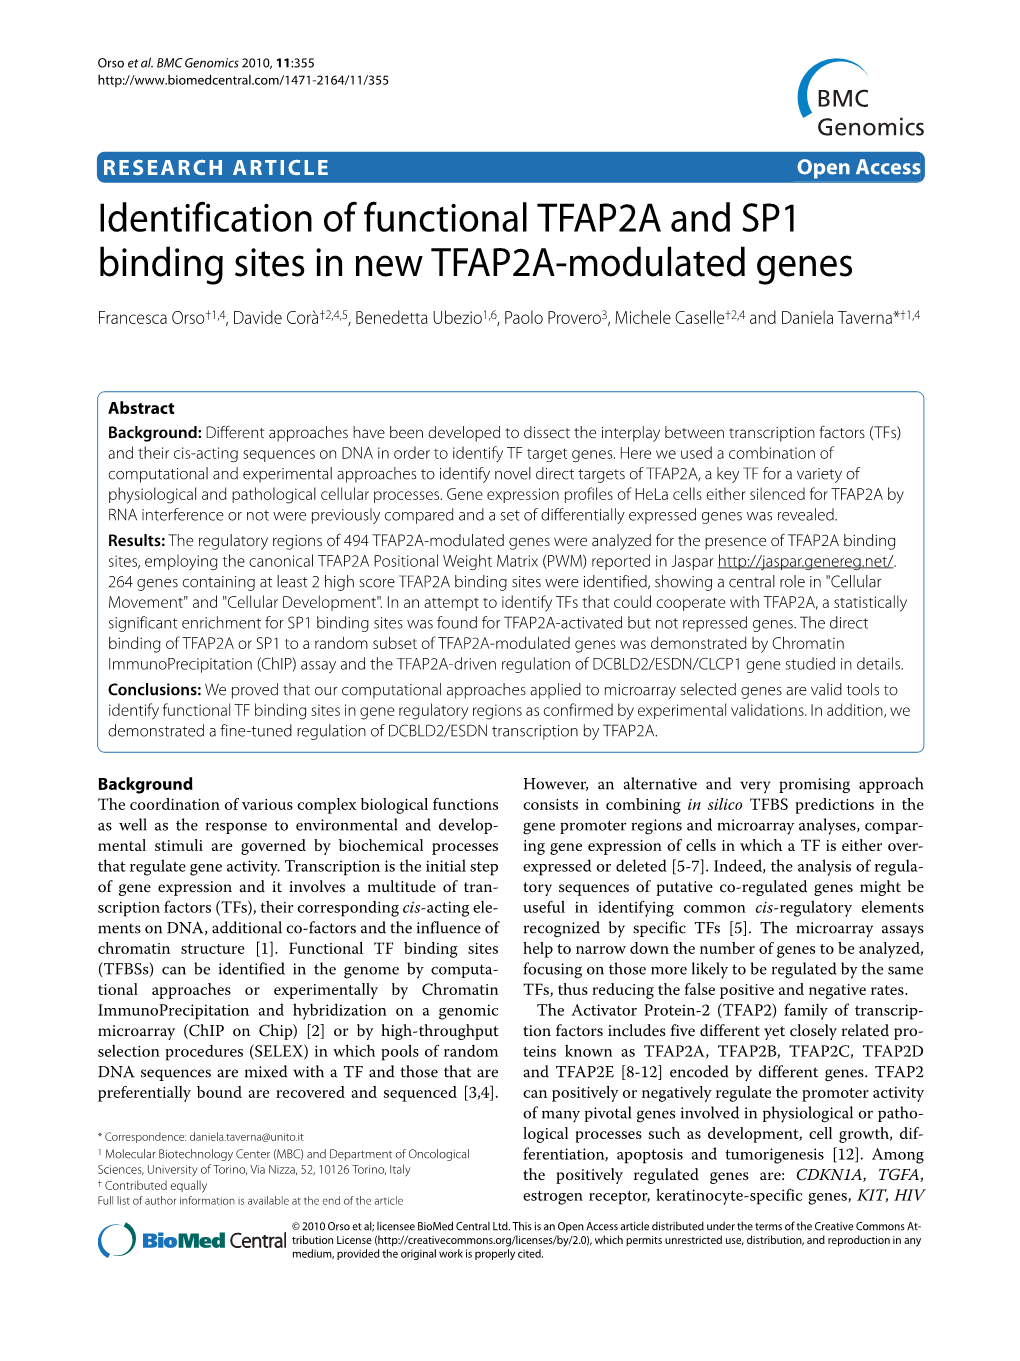 Research Article Identification of Functional TFAP2A and SP1 Binding